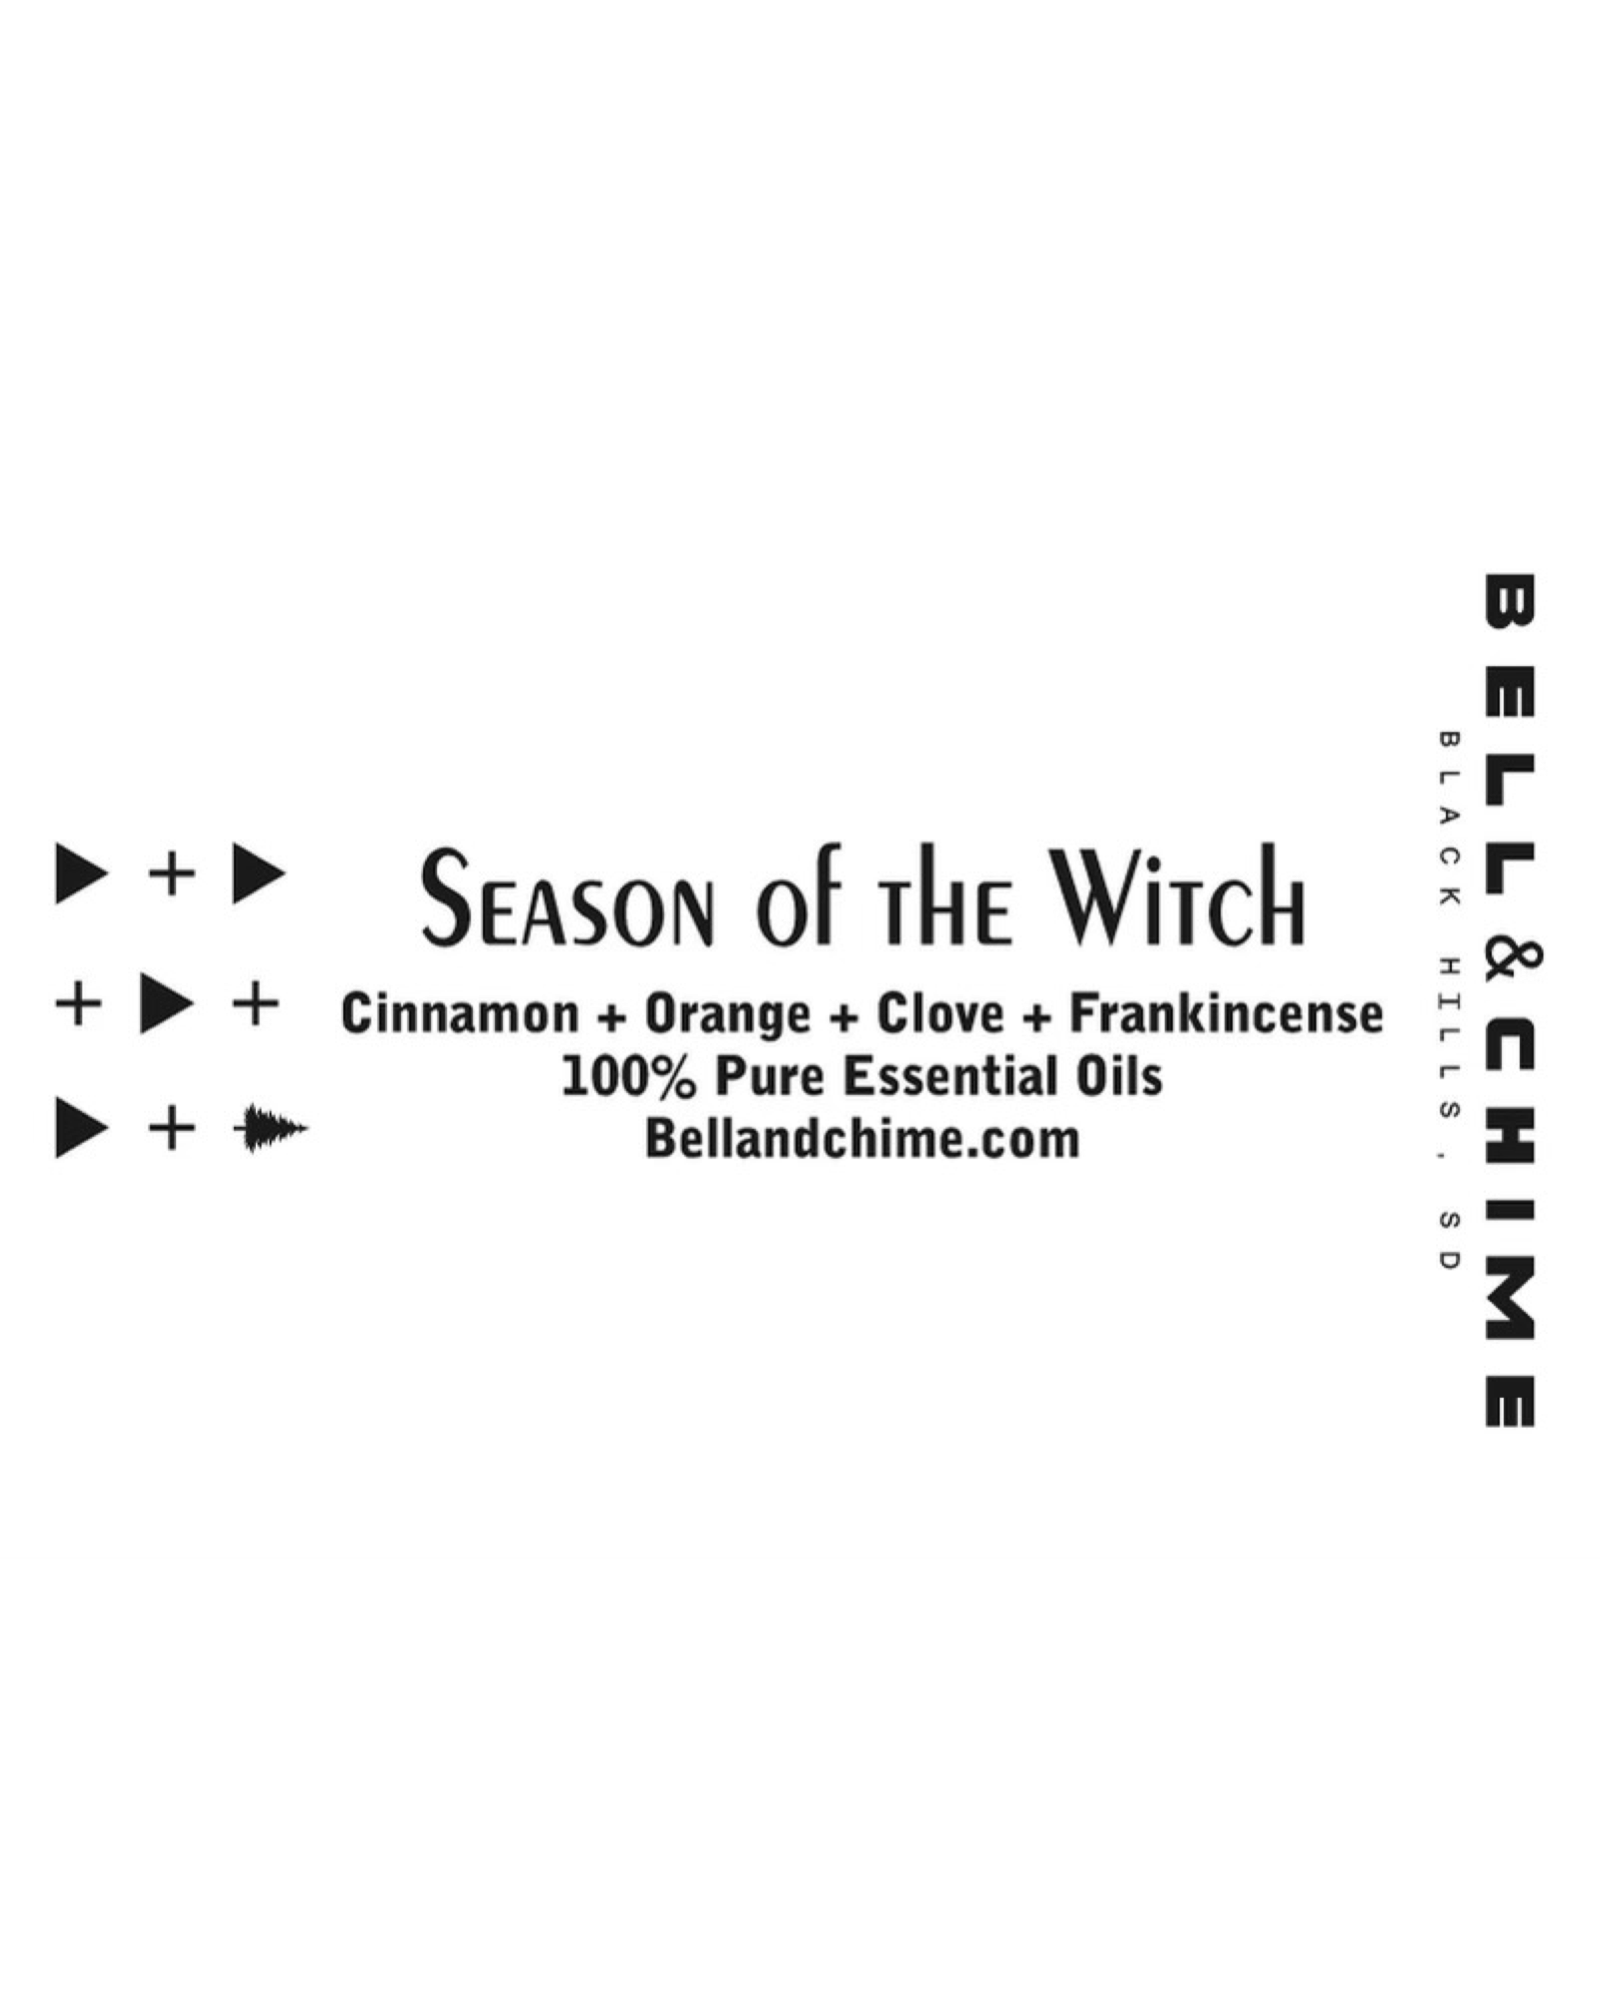 Bell & Chime: Black Hills, SD "Season of the Witch," Cinnamon + Orange + Clove + Frankincense. 100% Pure Essential Oils